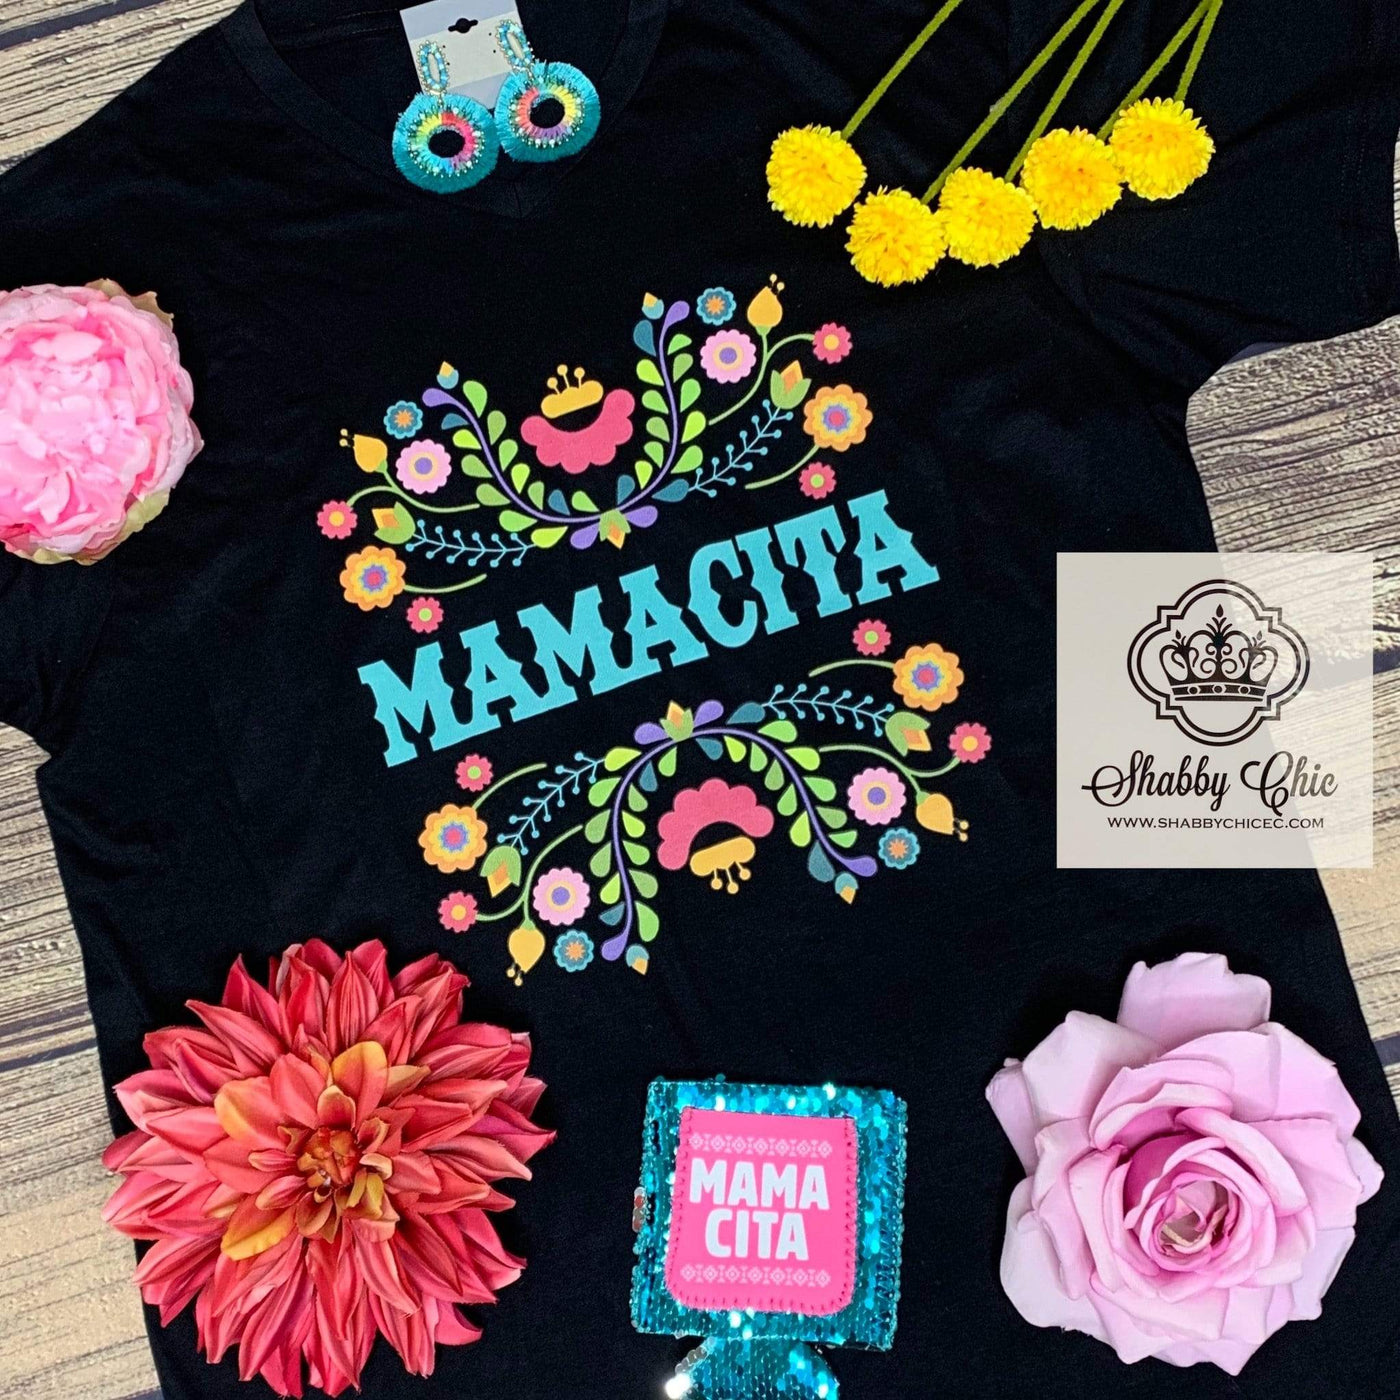 Mamacita - Ornate Flowers Shabby Chic Boutique and Tanning Salon